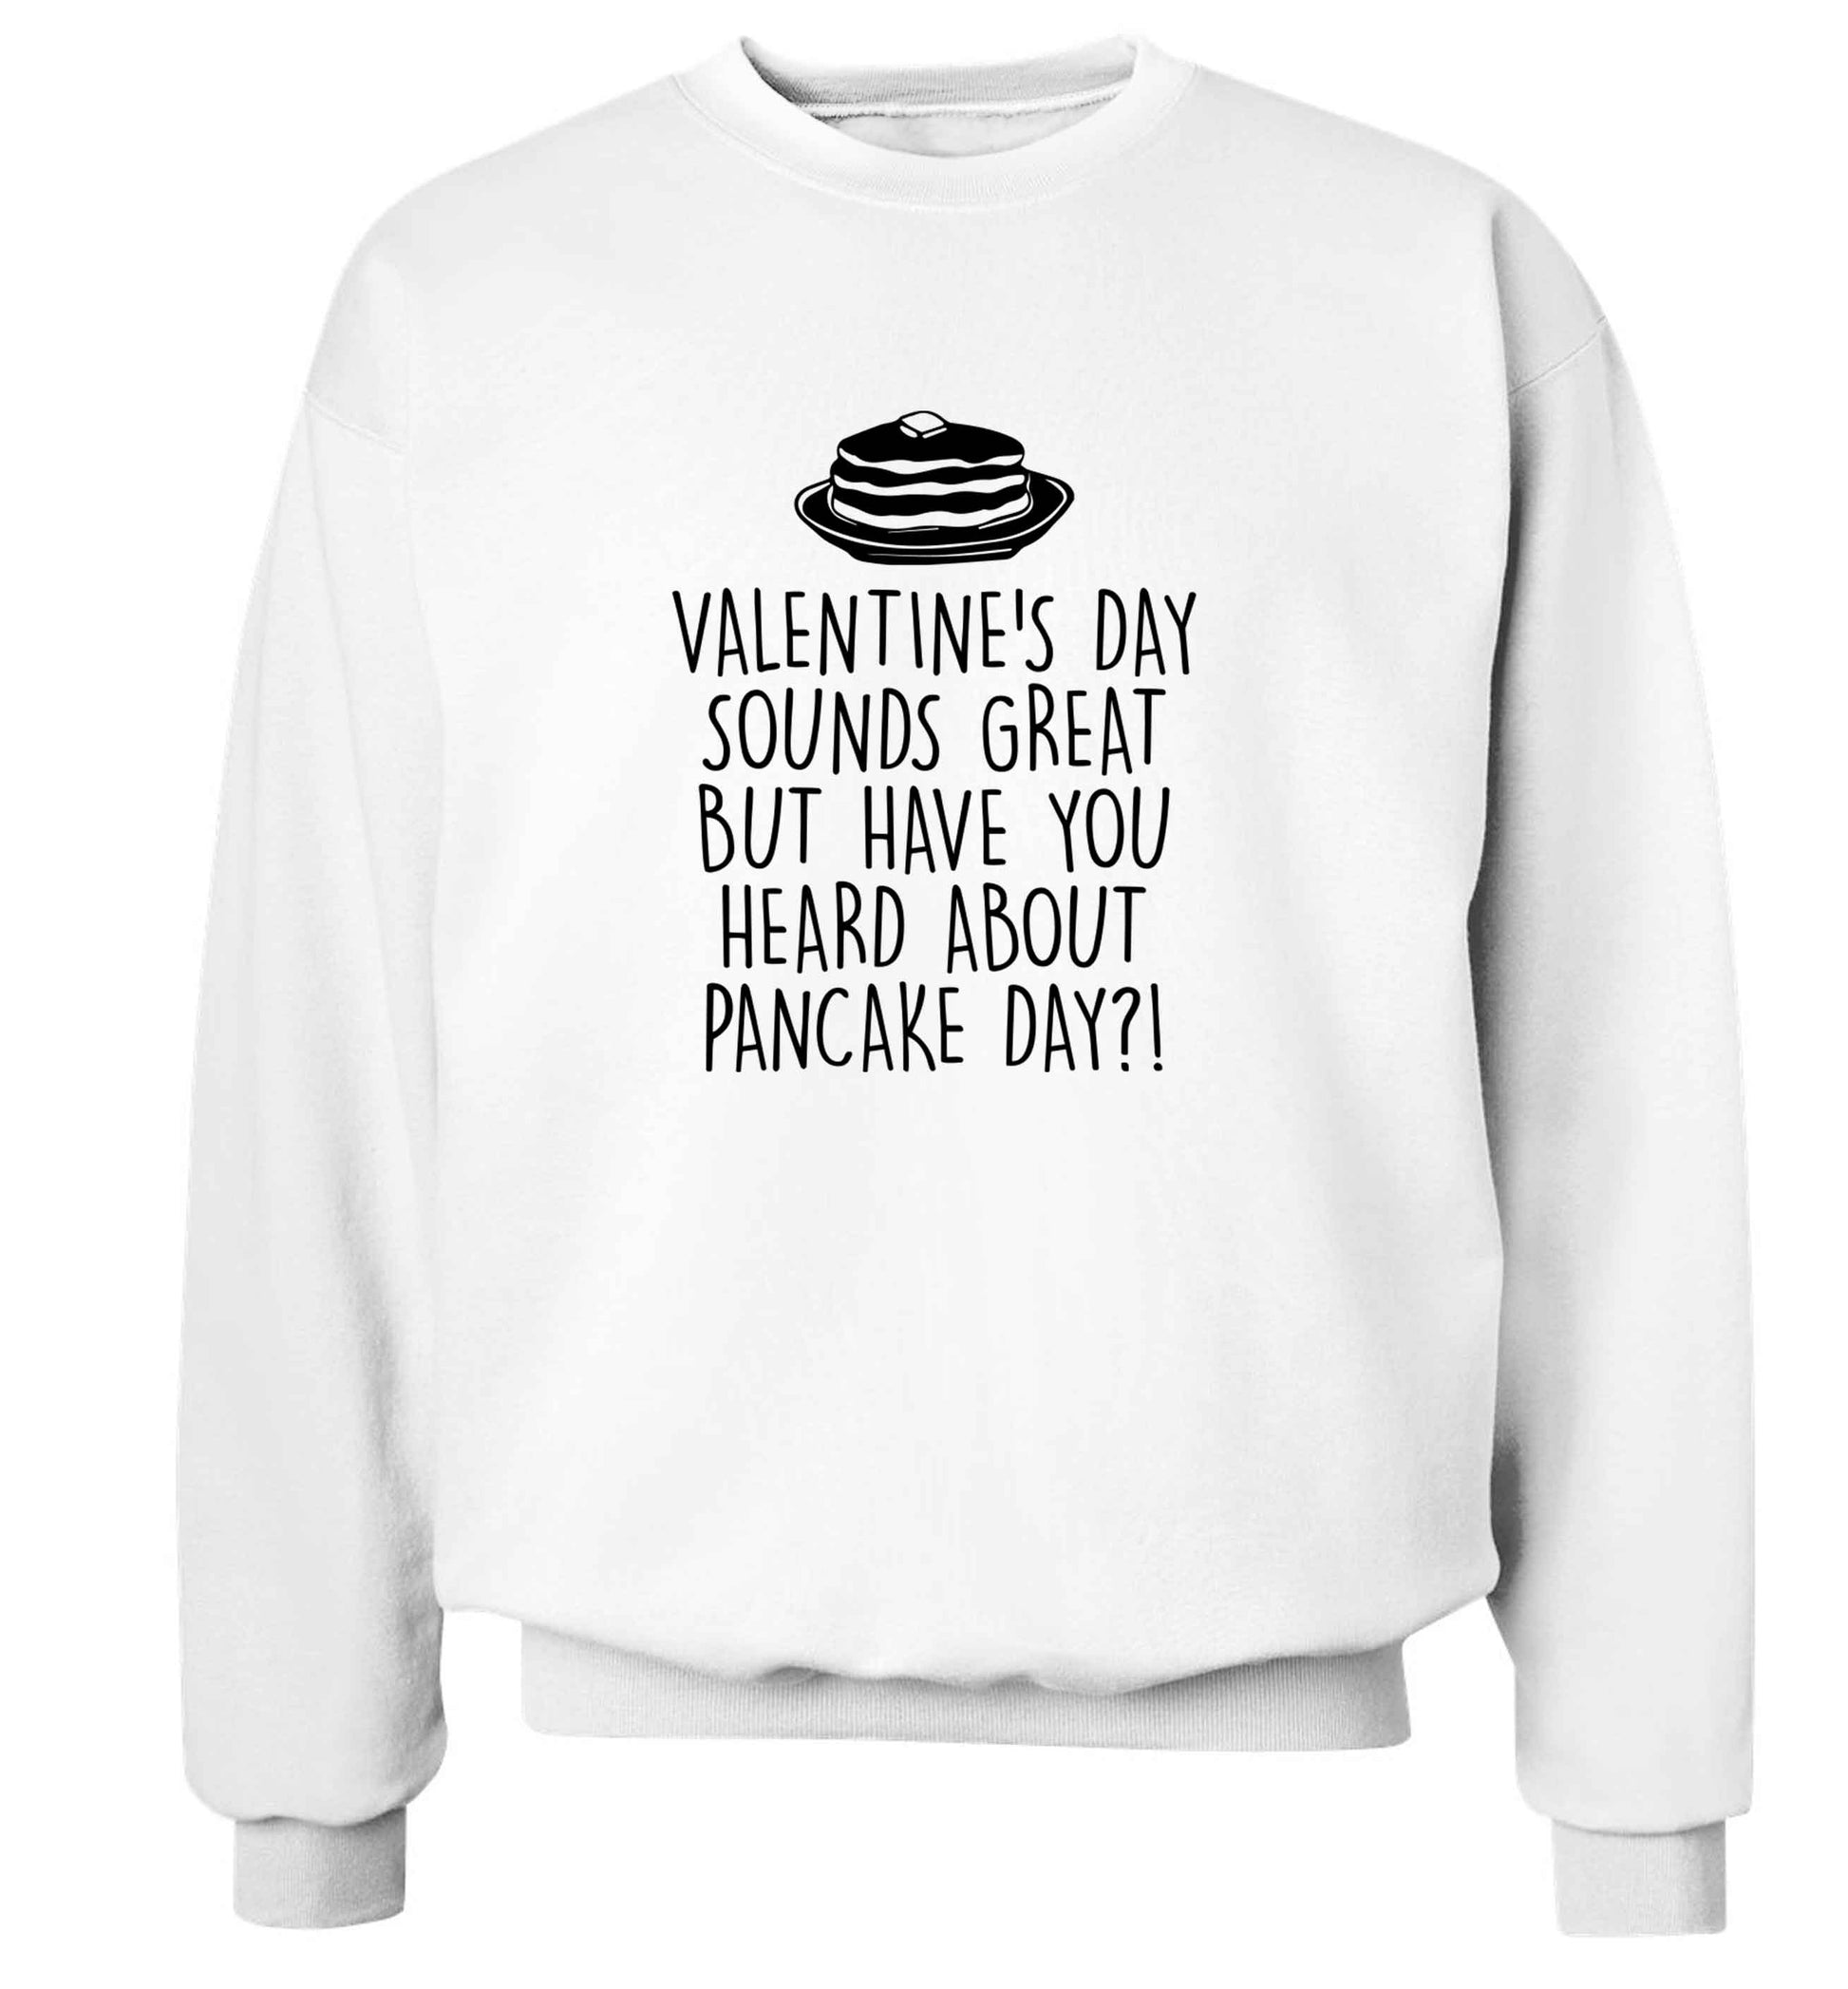 Valentine's day sounds great but have you heard about pancake day?! adult's unisex white sweater 2XL